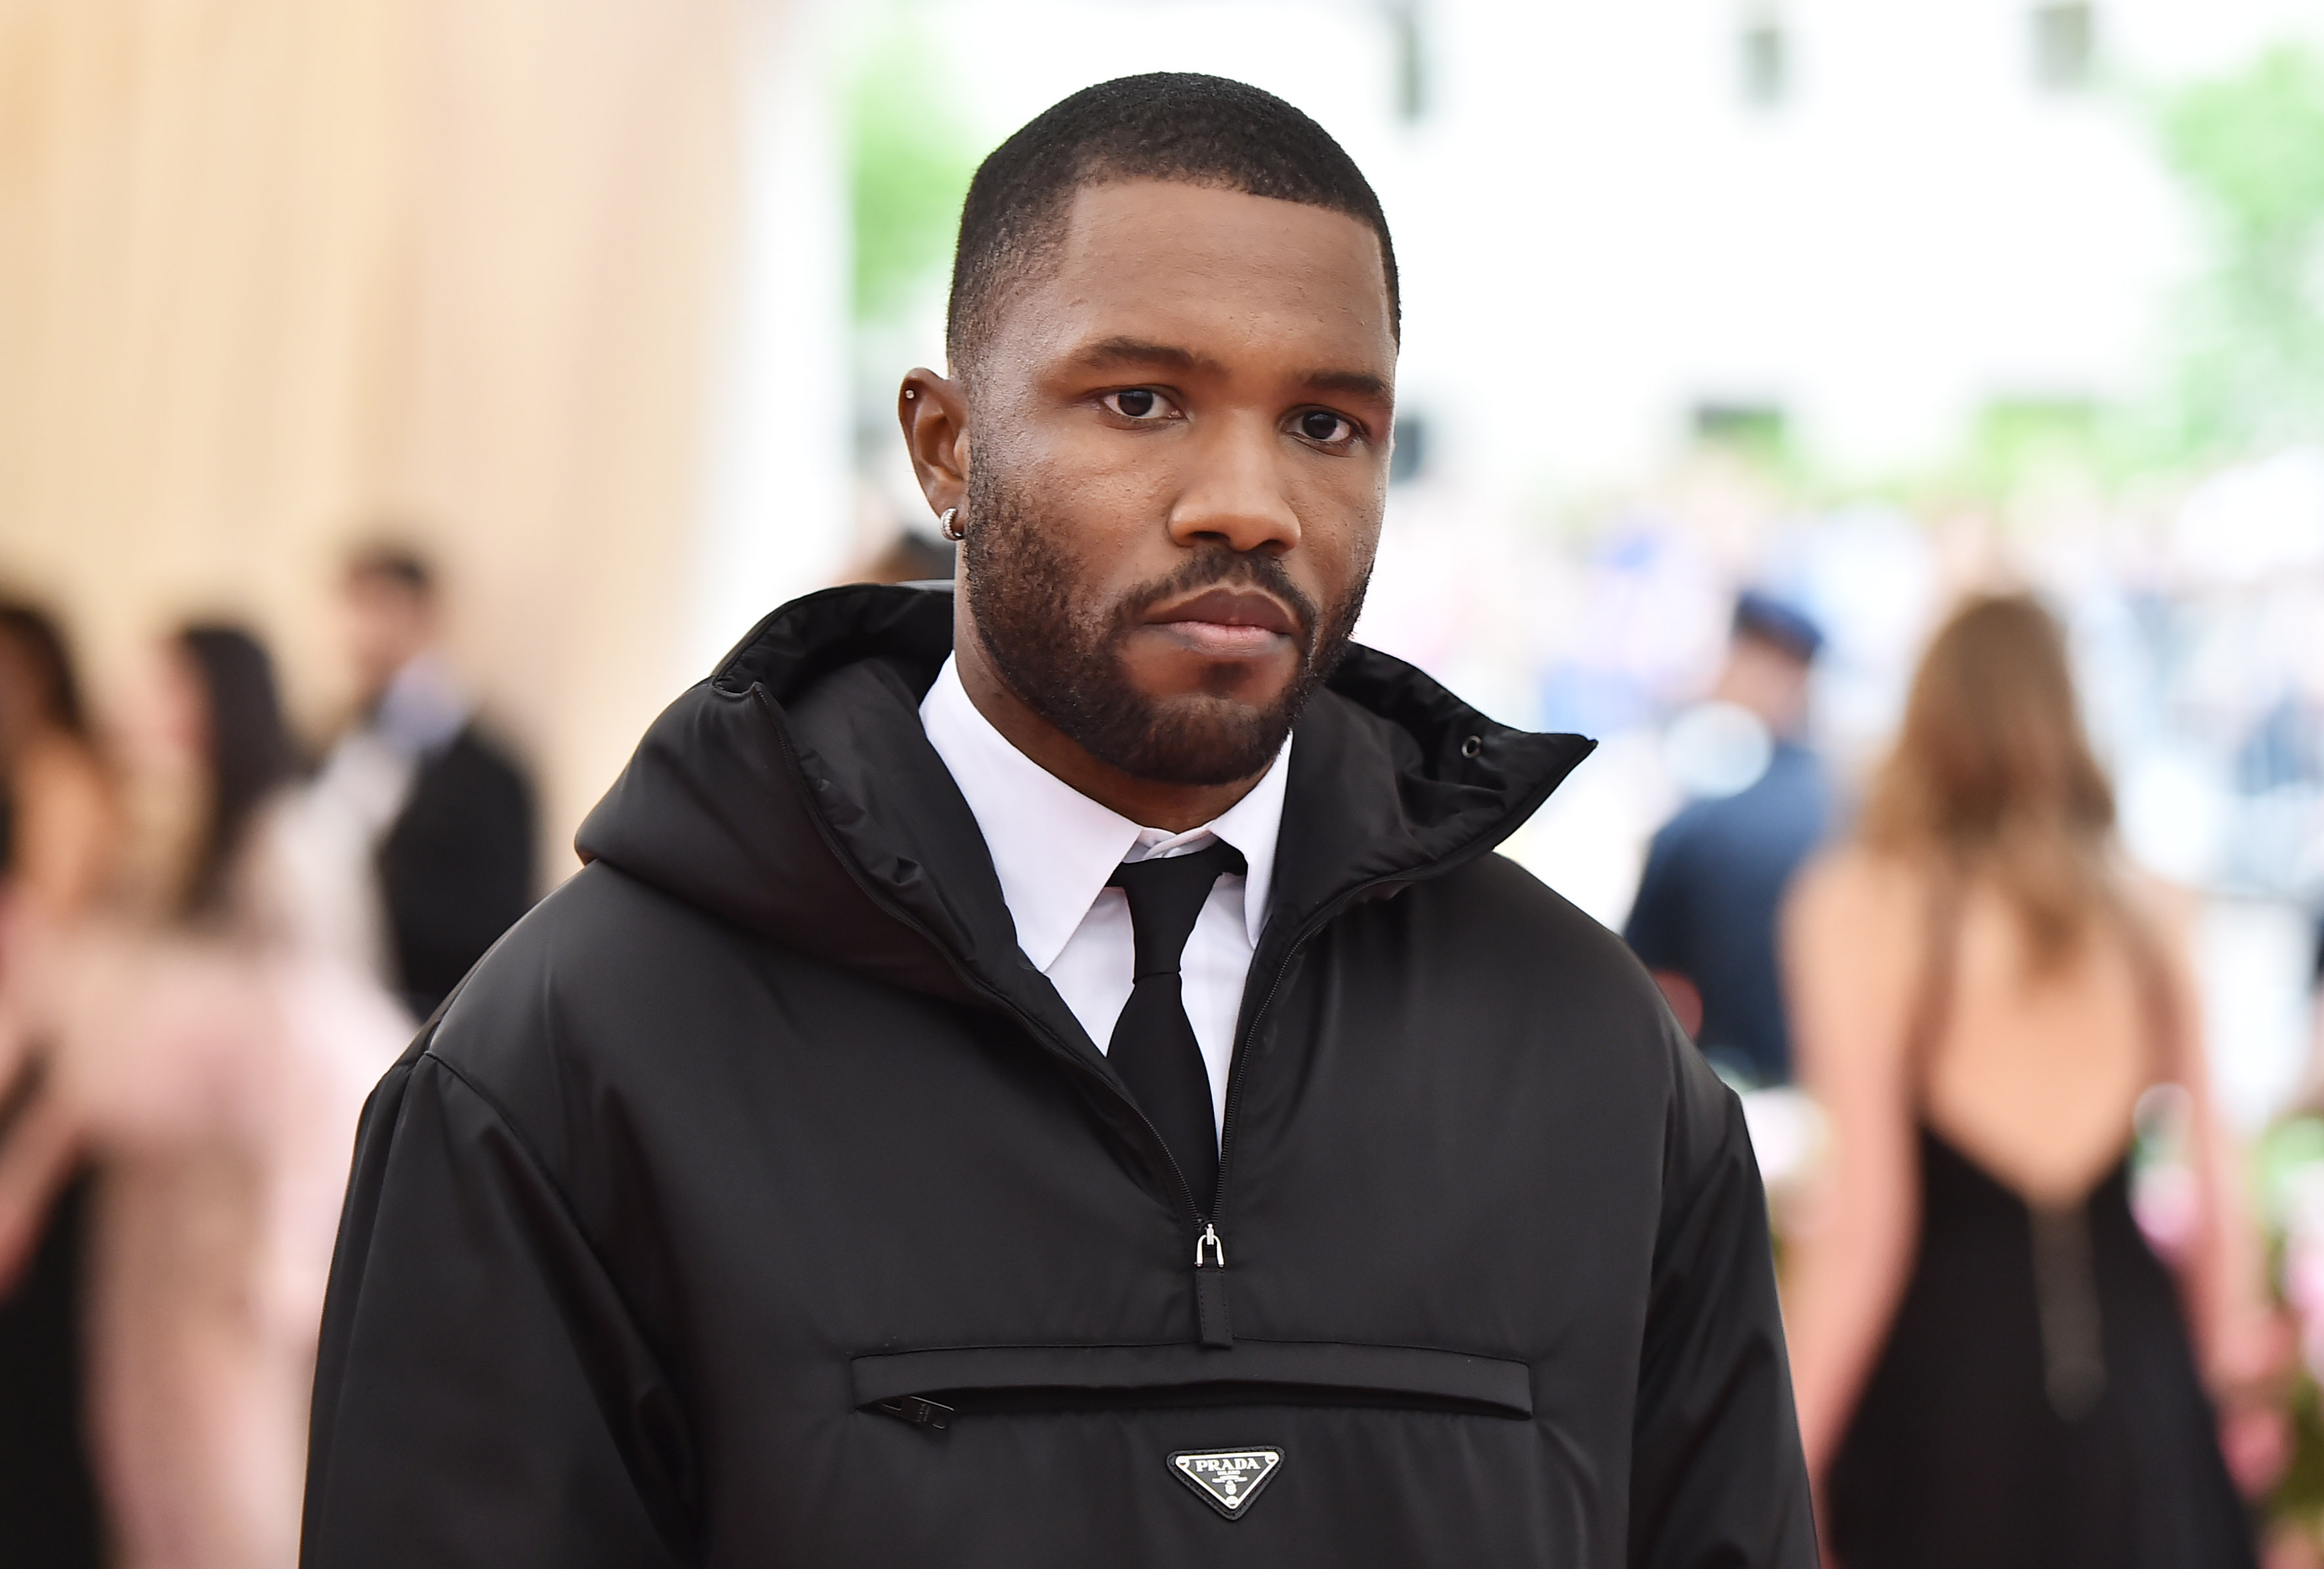 Singer-songwriter Frank Ocean attends the 2019 Met Gala Celebrating Camp: Notes on Fashion at Metropolitan Museum of Art on May 6, 2019 in New York City | Source: Getty Images